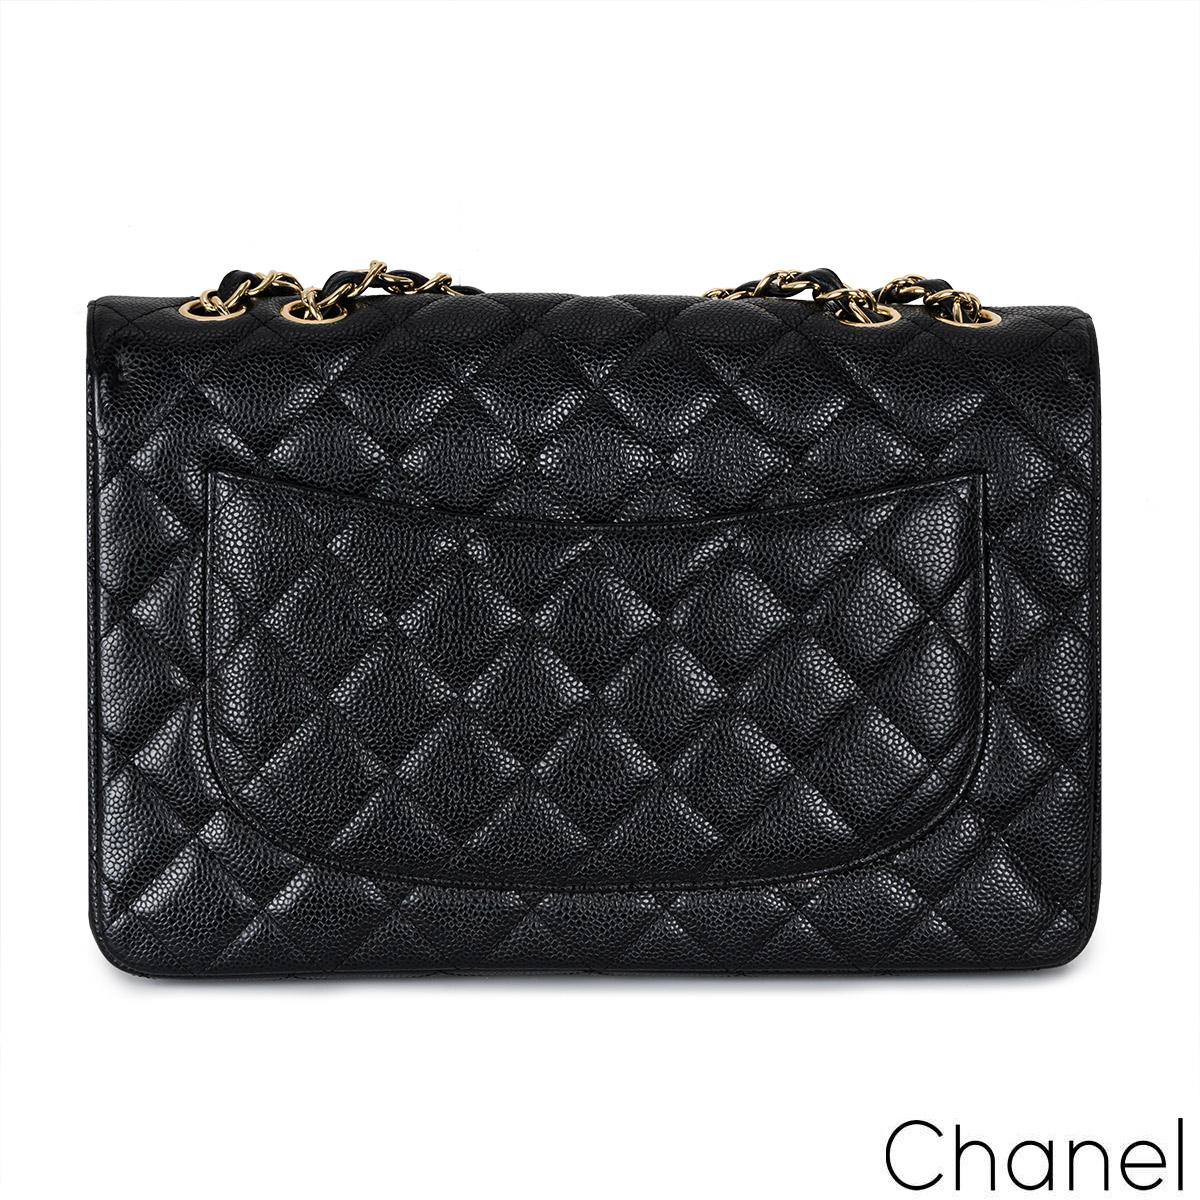 A classic Chanel Jumbo Classic Single Flap Handbag. The exterior of this jumbo classic is crafted in black caviar quilted leather with gold-tone hardware. It features a front flap with signature CC turnlock closure, half moon back pocket, and an